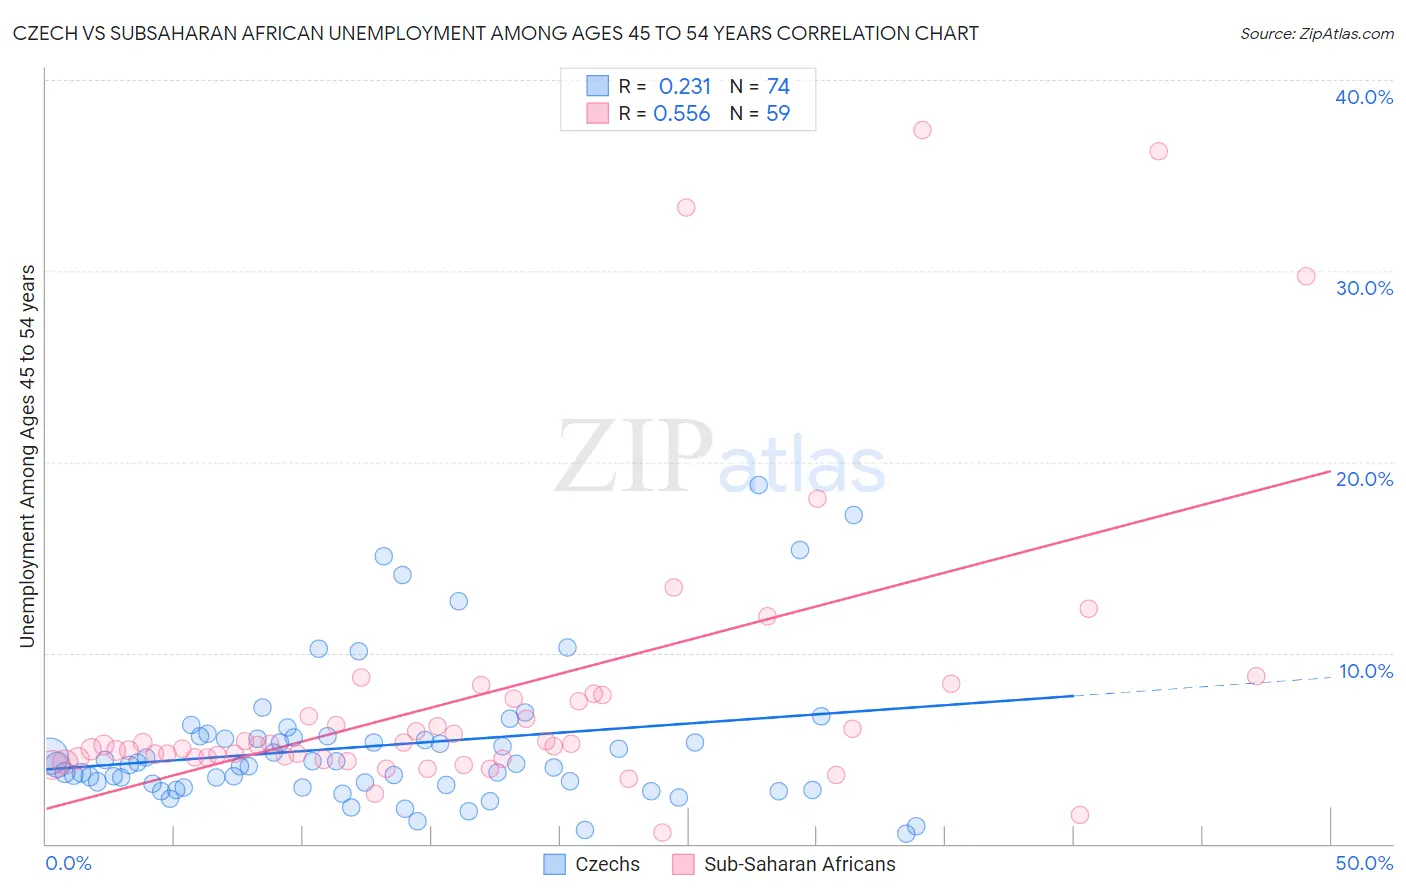 Czech vs Subsaharan African Unemployment Among Ages 45 to 54 years